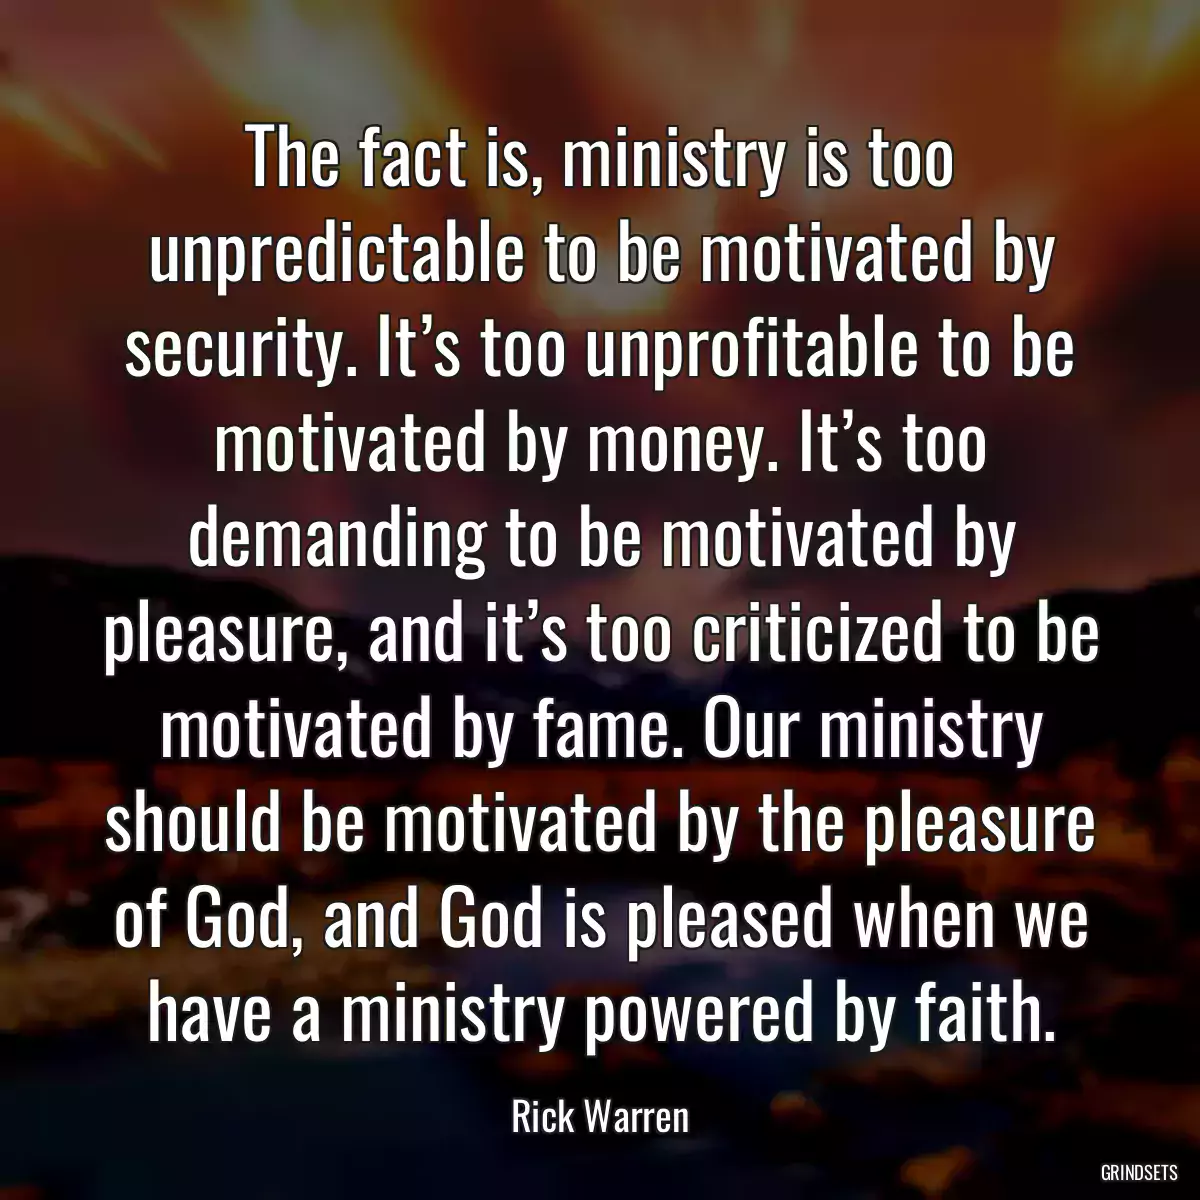 The fact is, ministry is too unpredictable to be motivated by security. It’s too unprofitable to be motivated by money. It’s too demanding to be motivated by pleasure, and it’s too criticized to be motivated by fame. Our ministry should be motivated by the pleasure of God, and God is pleased when we have a ministry powered by faith.